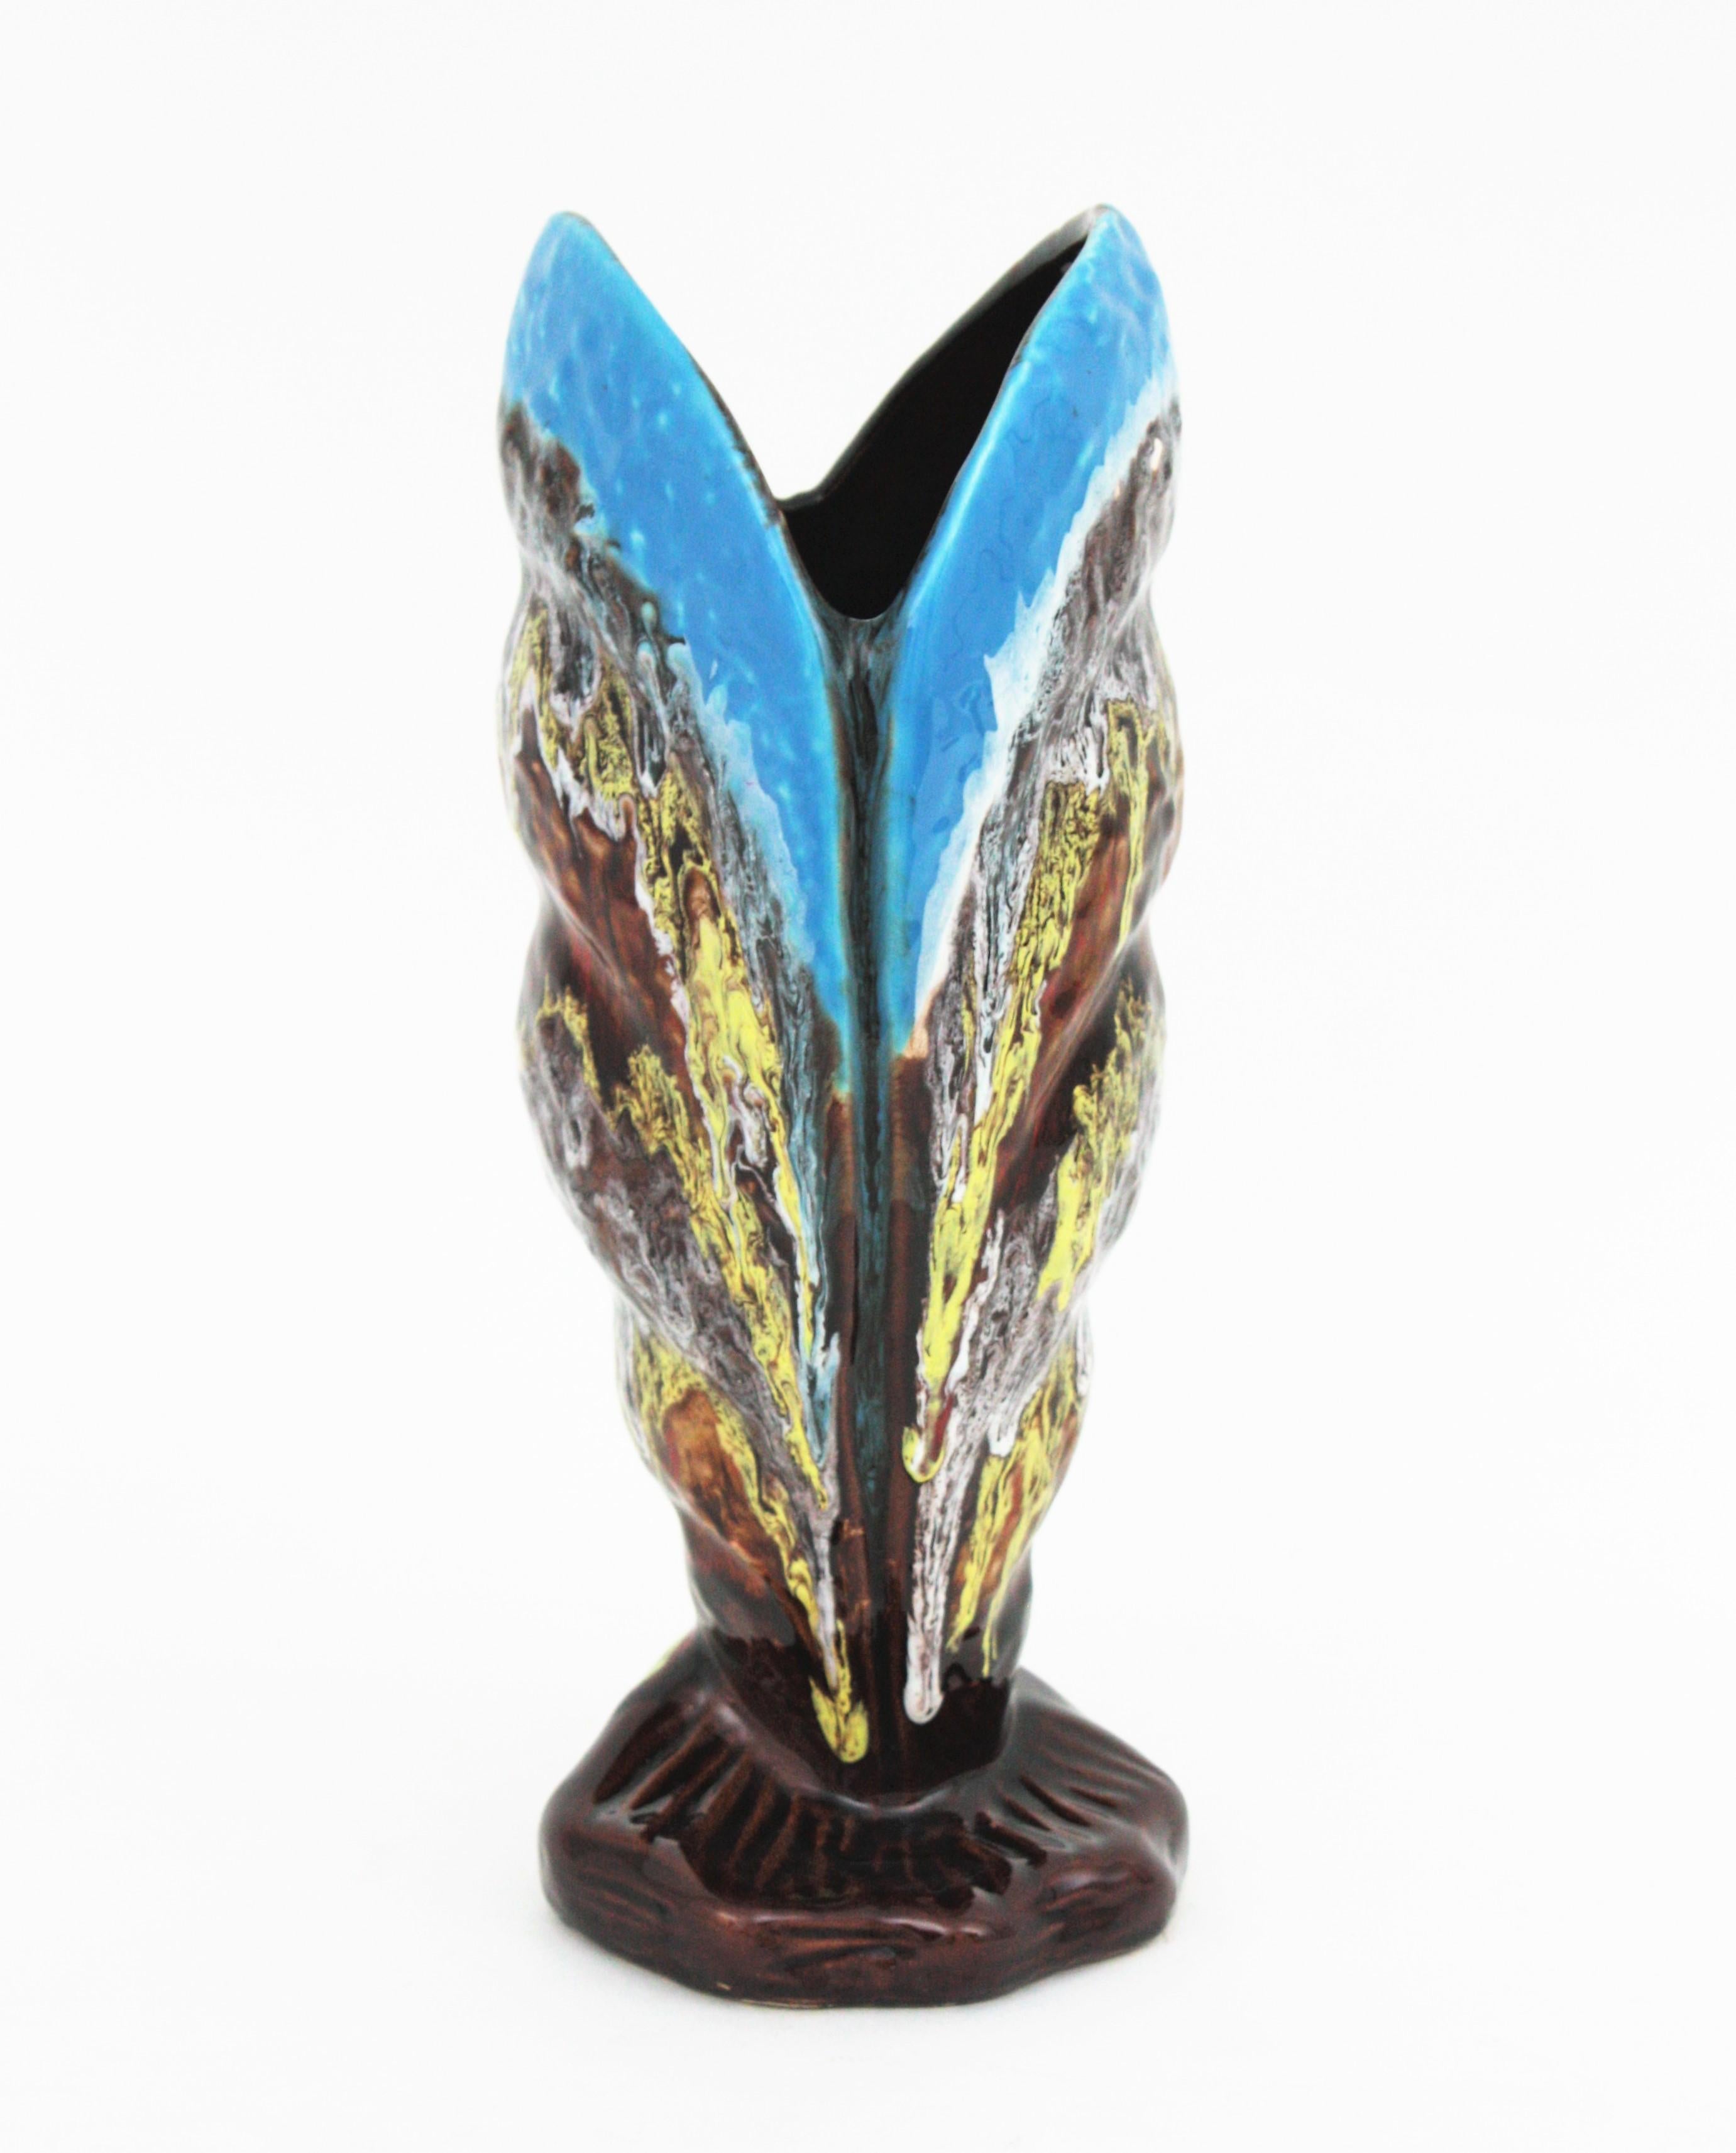 20th Century French Vallauris Majolica Shell Shaped Vase in Multi Color Glazed Ceramic For Sale